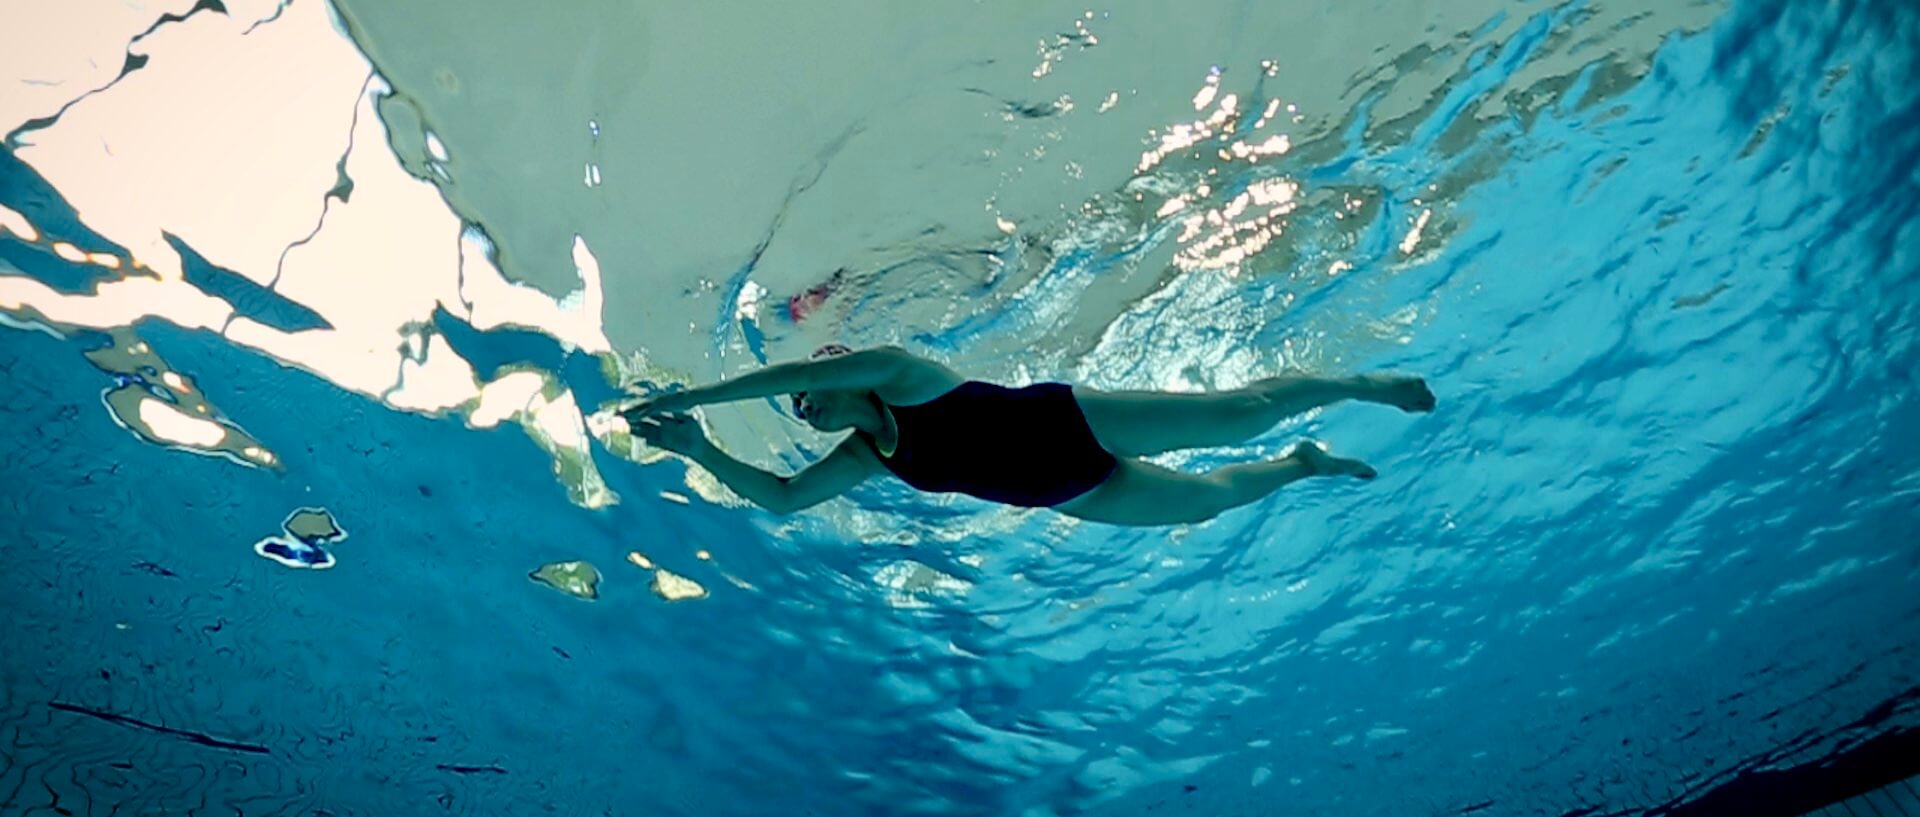 Still from Eskape. Underwater shot of a woman in a one-piece swimsuit and swim cap, swimming with arms crossing in front of her. The water is bright blue and in areas appears silver from the reflection of light on the surface.